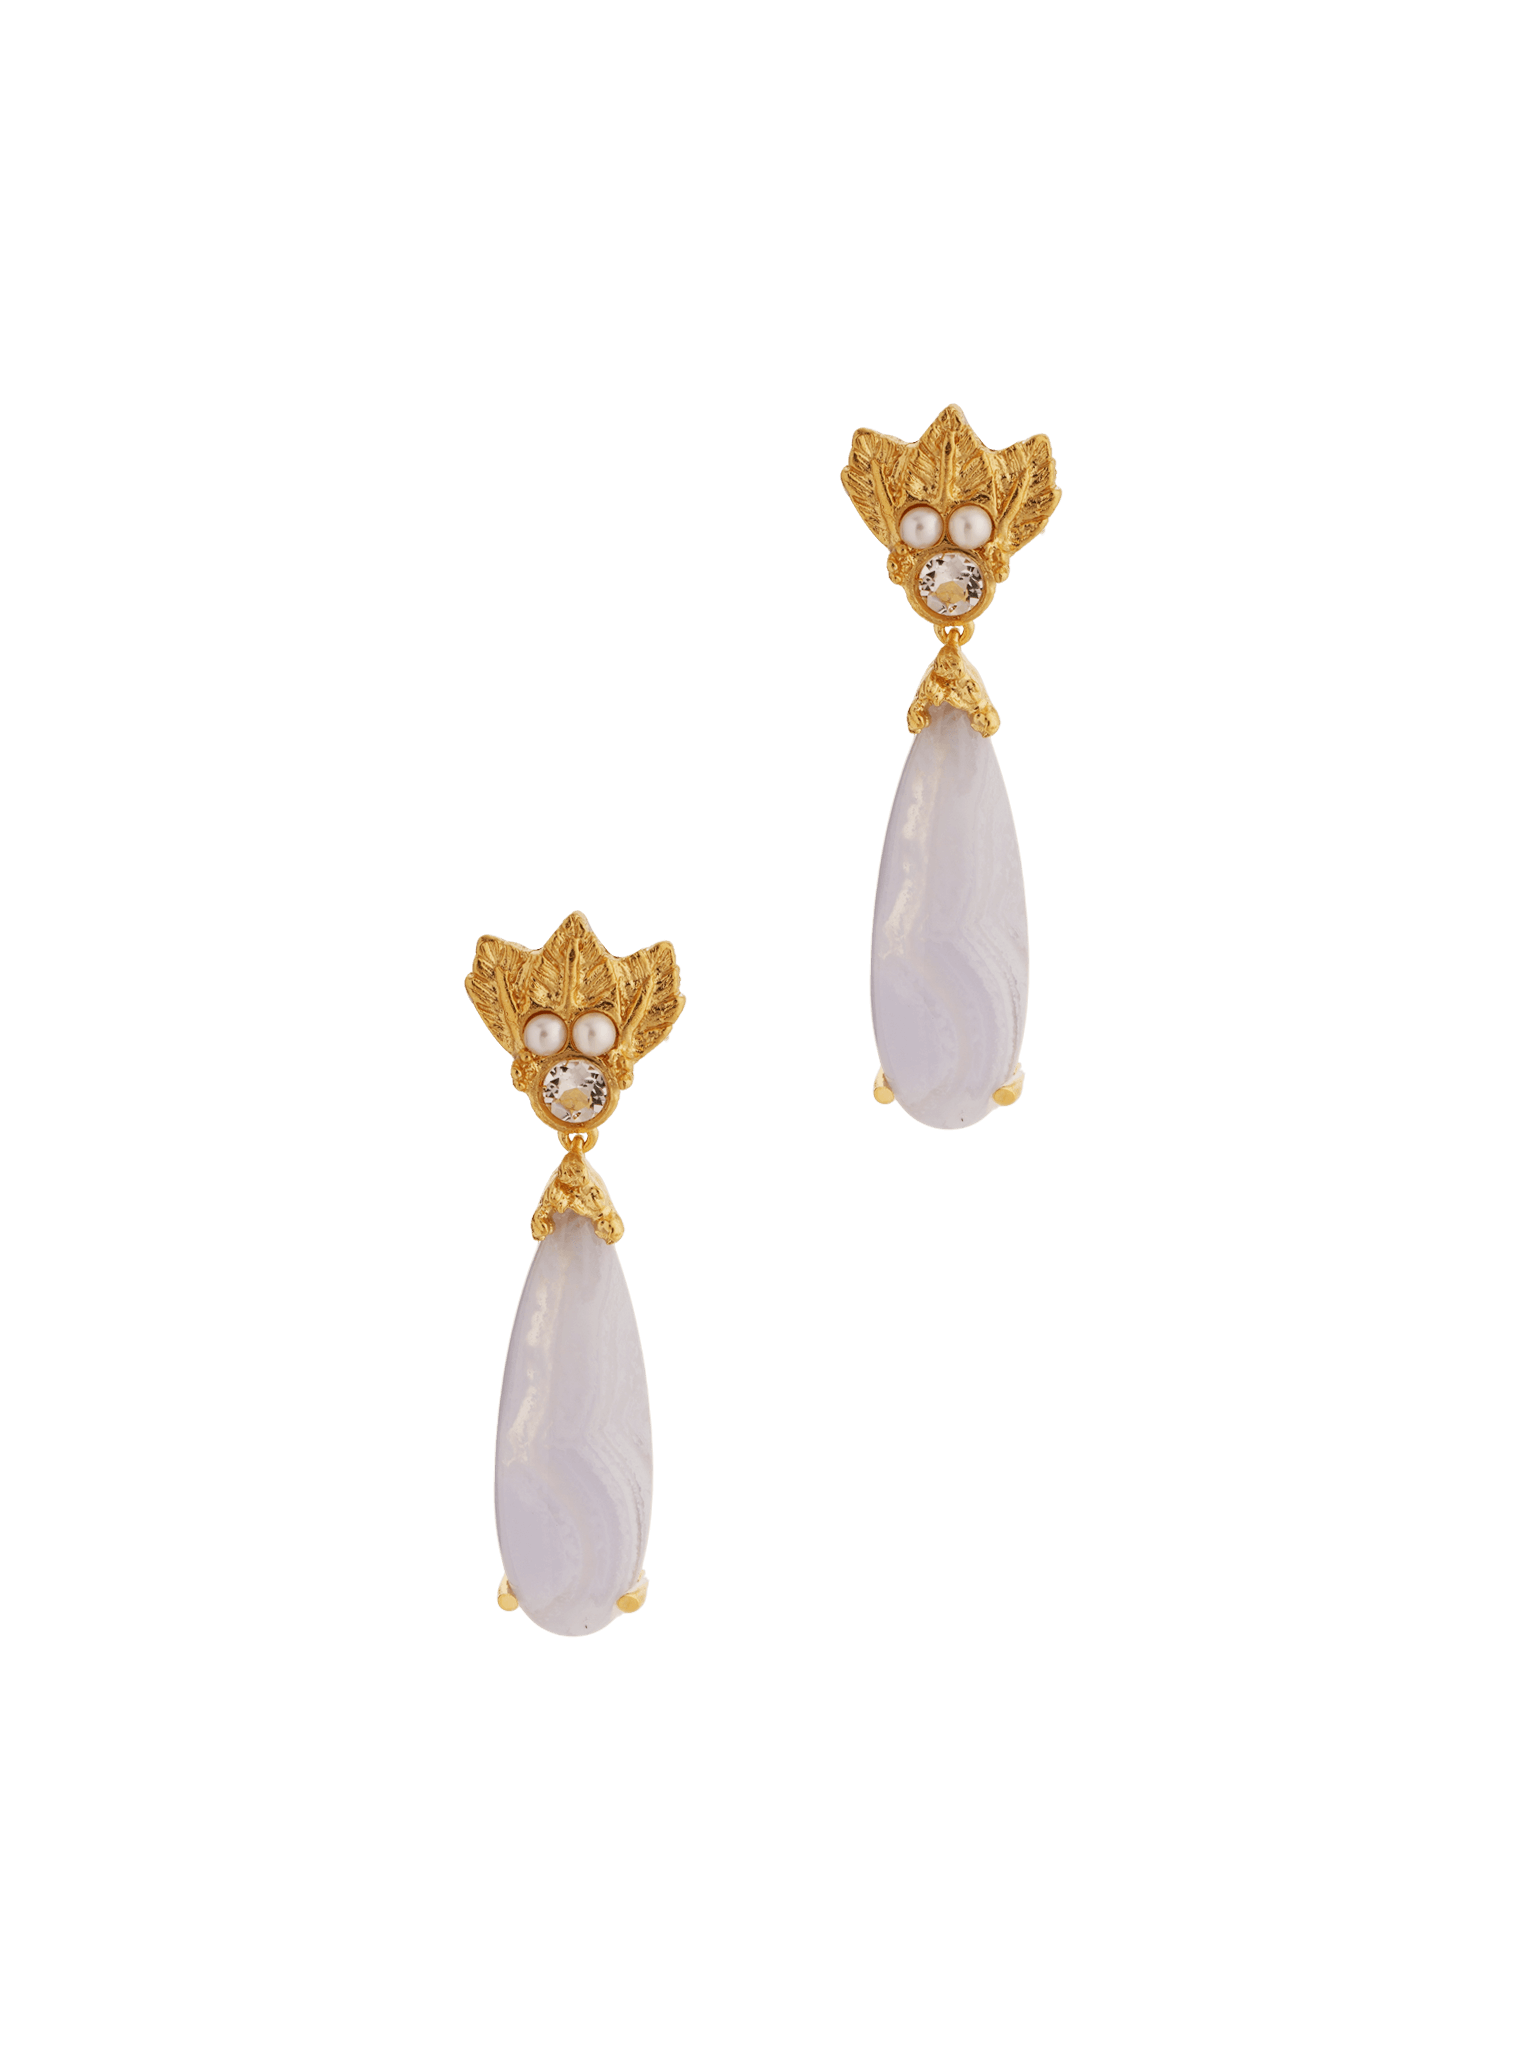 A pair of gold-plated earrings with white agate and diamonds, featuring cultured fresh-water pearls - The Muse III Chalcedony earrings from Cremilde Bispo Jewellery.